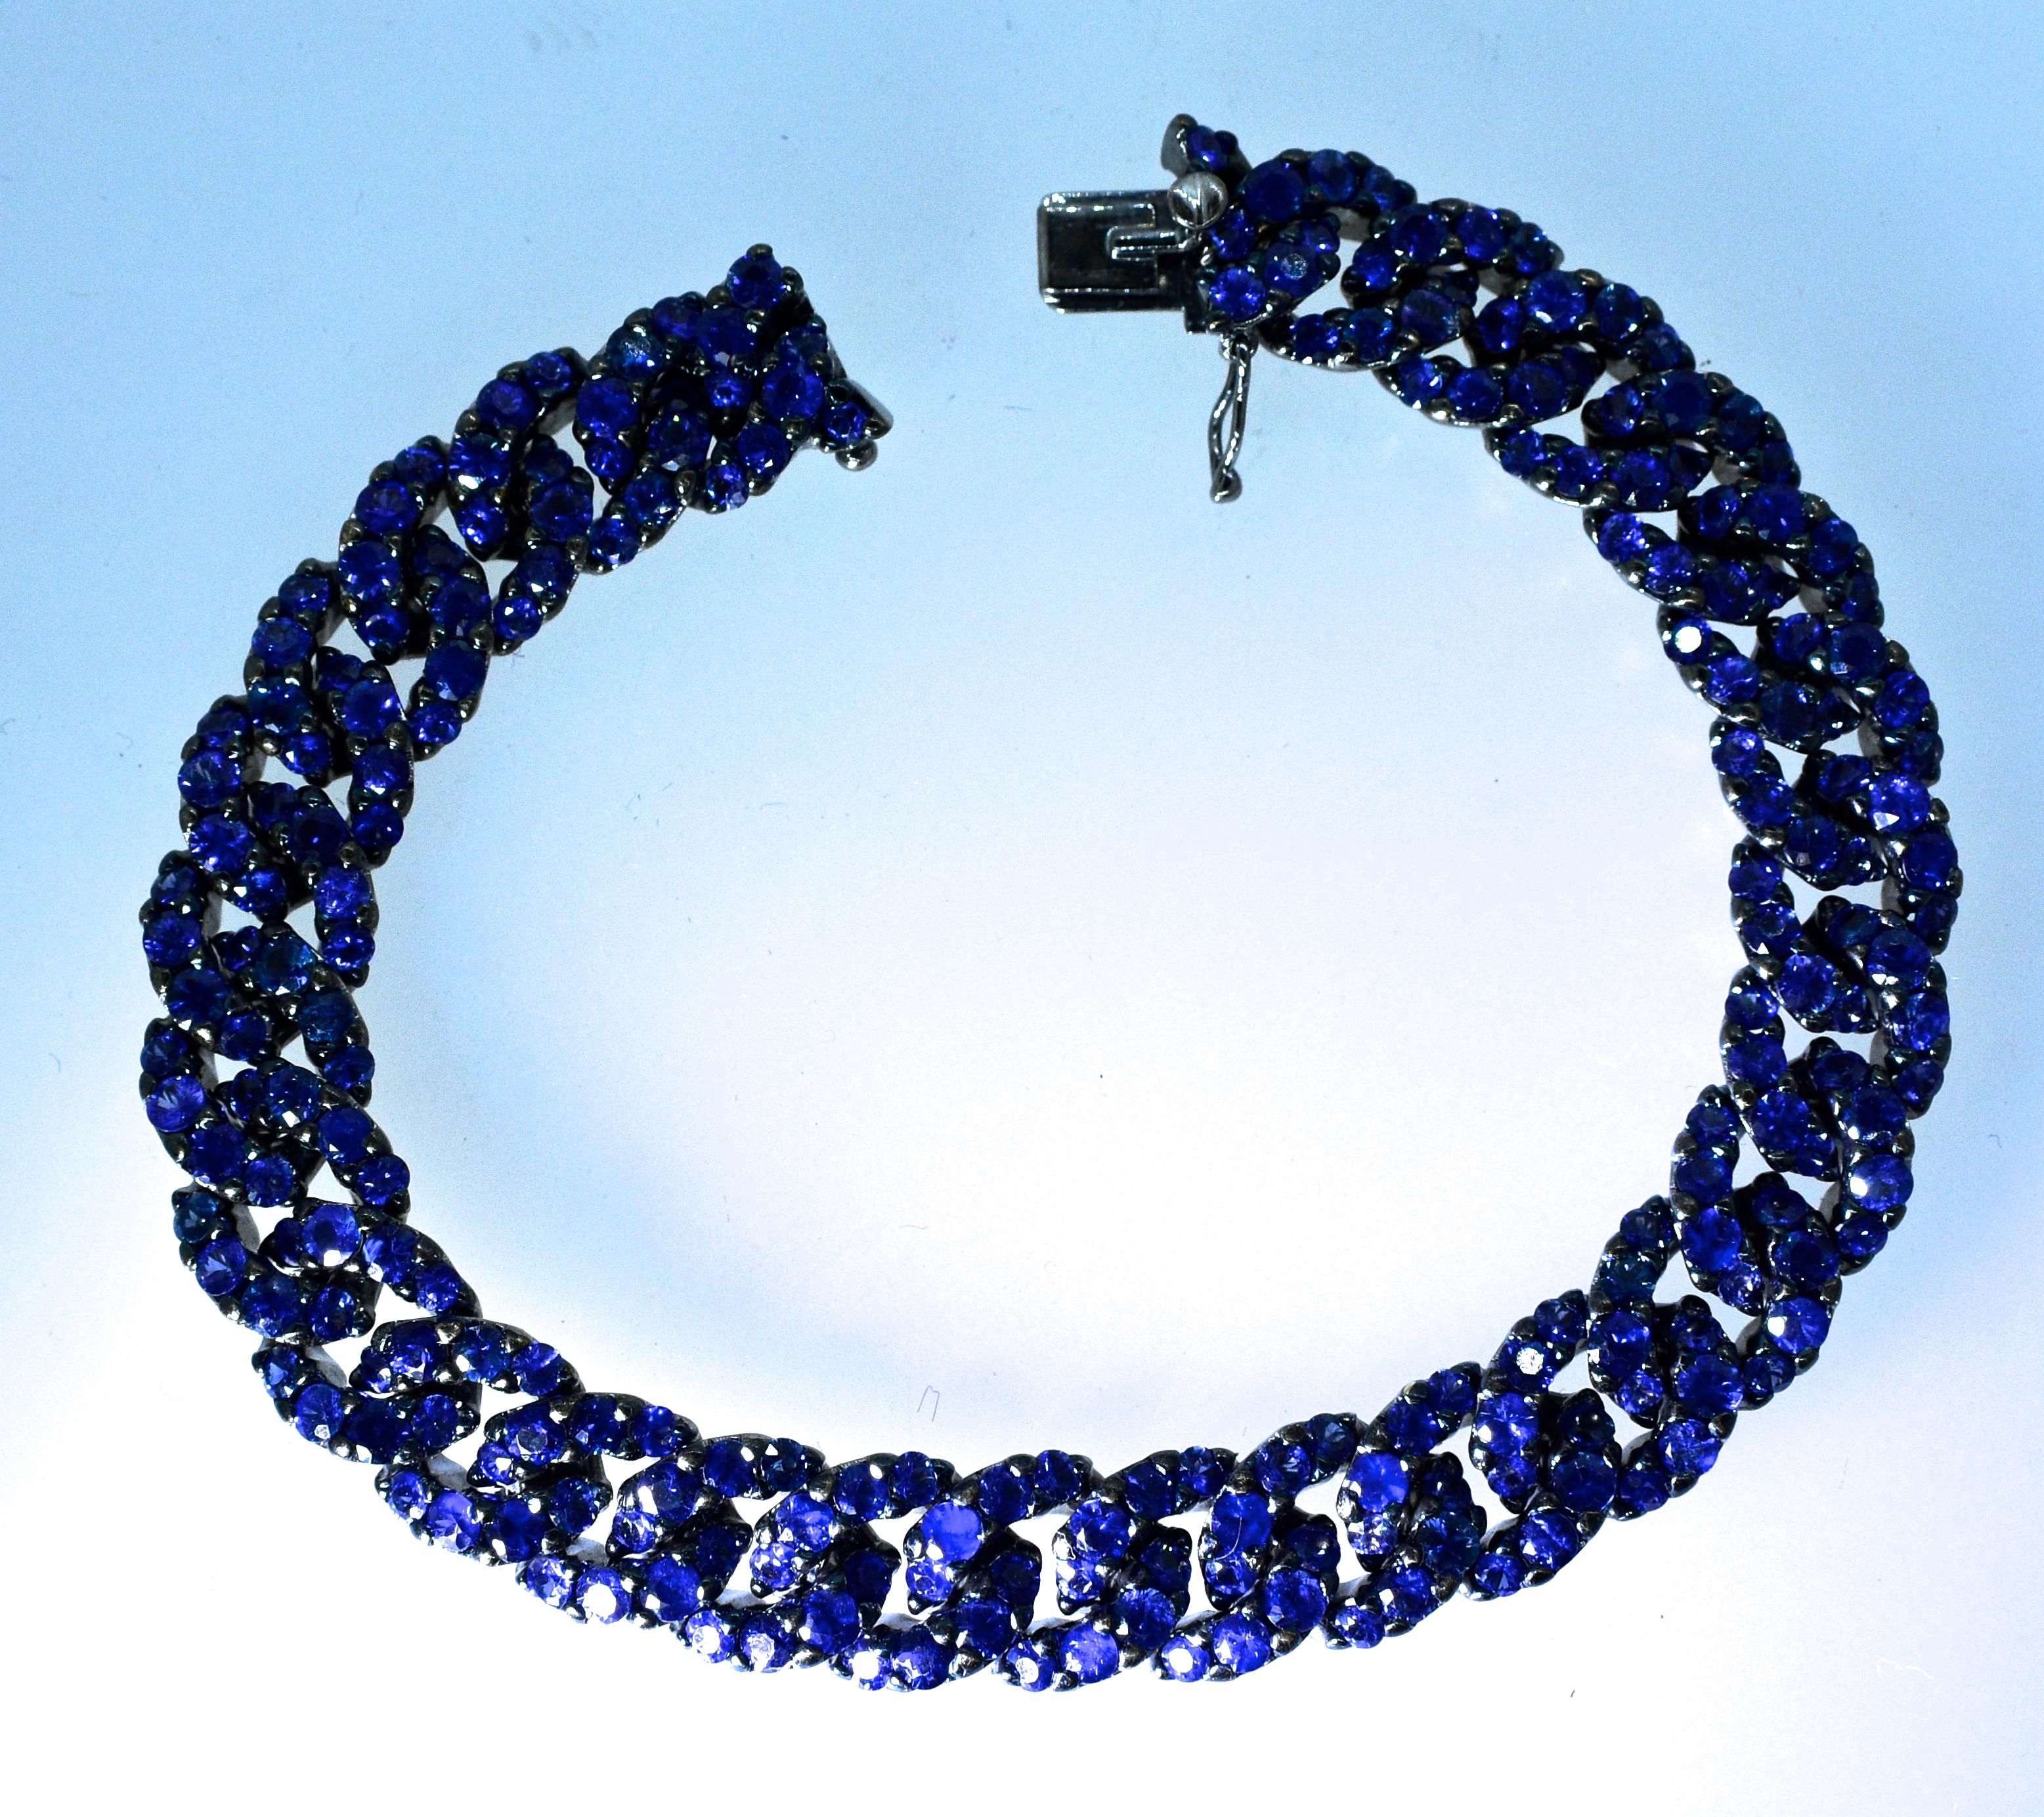 Crivelli bracelet pave set with 232 fine bright natural blue sapphires, all well matched and well cut, weighing exactly 16.26 cts., (marked with the weight on the verso), this link bracelet is 7.25 inches long and in excellent condition.